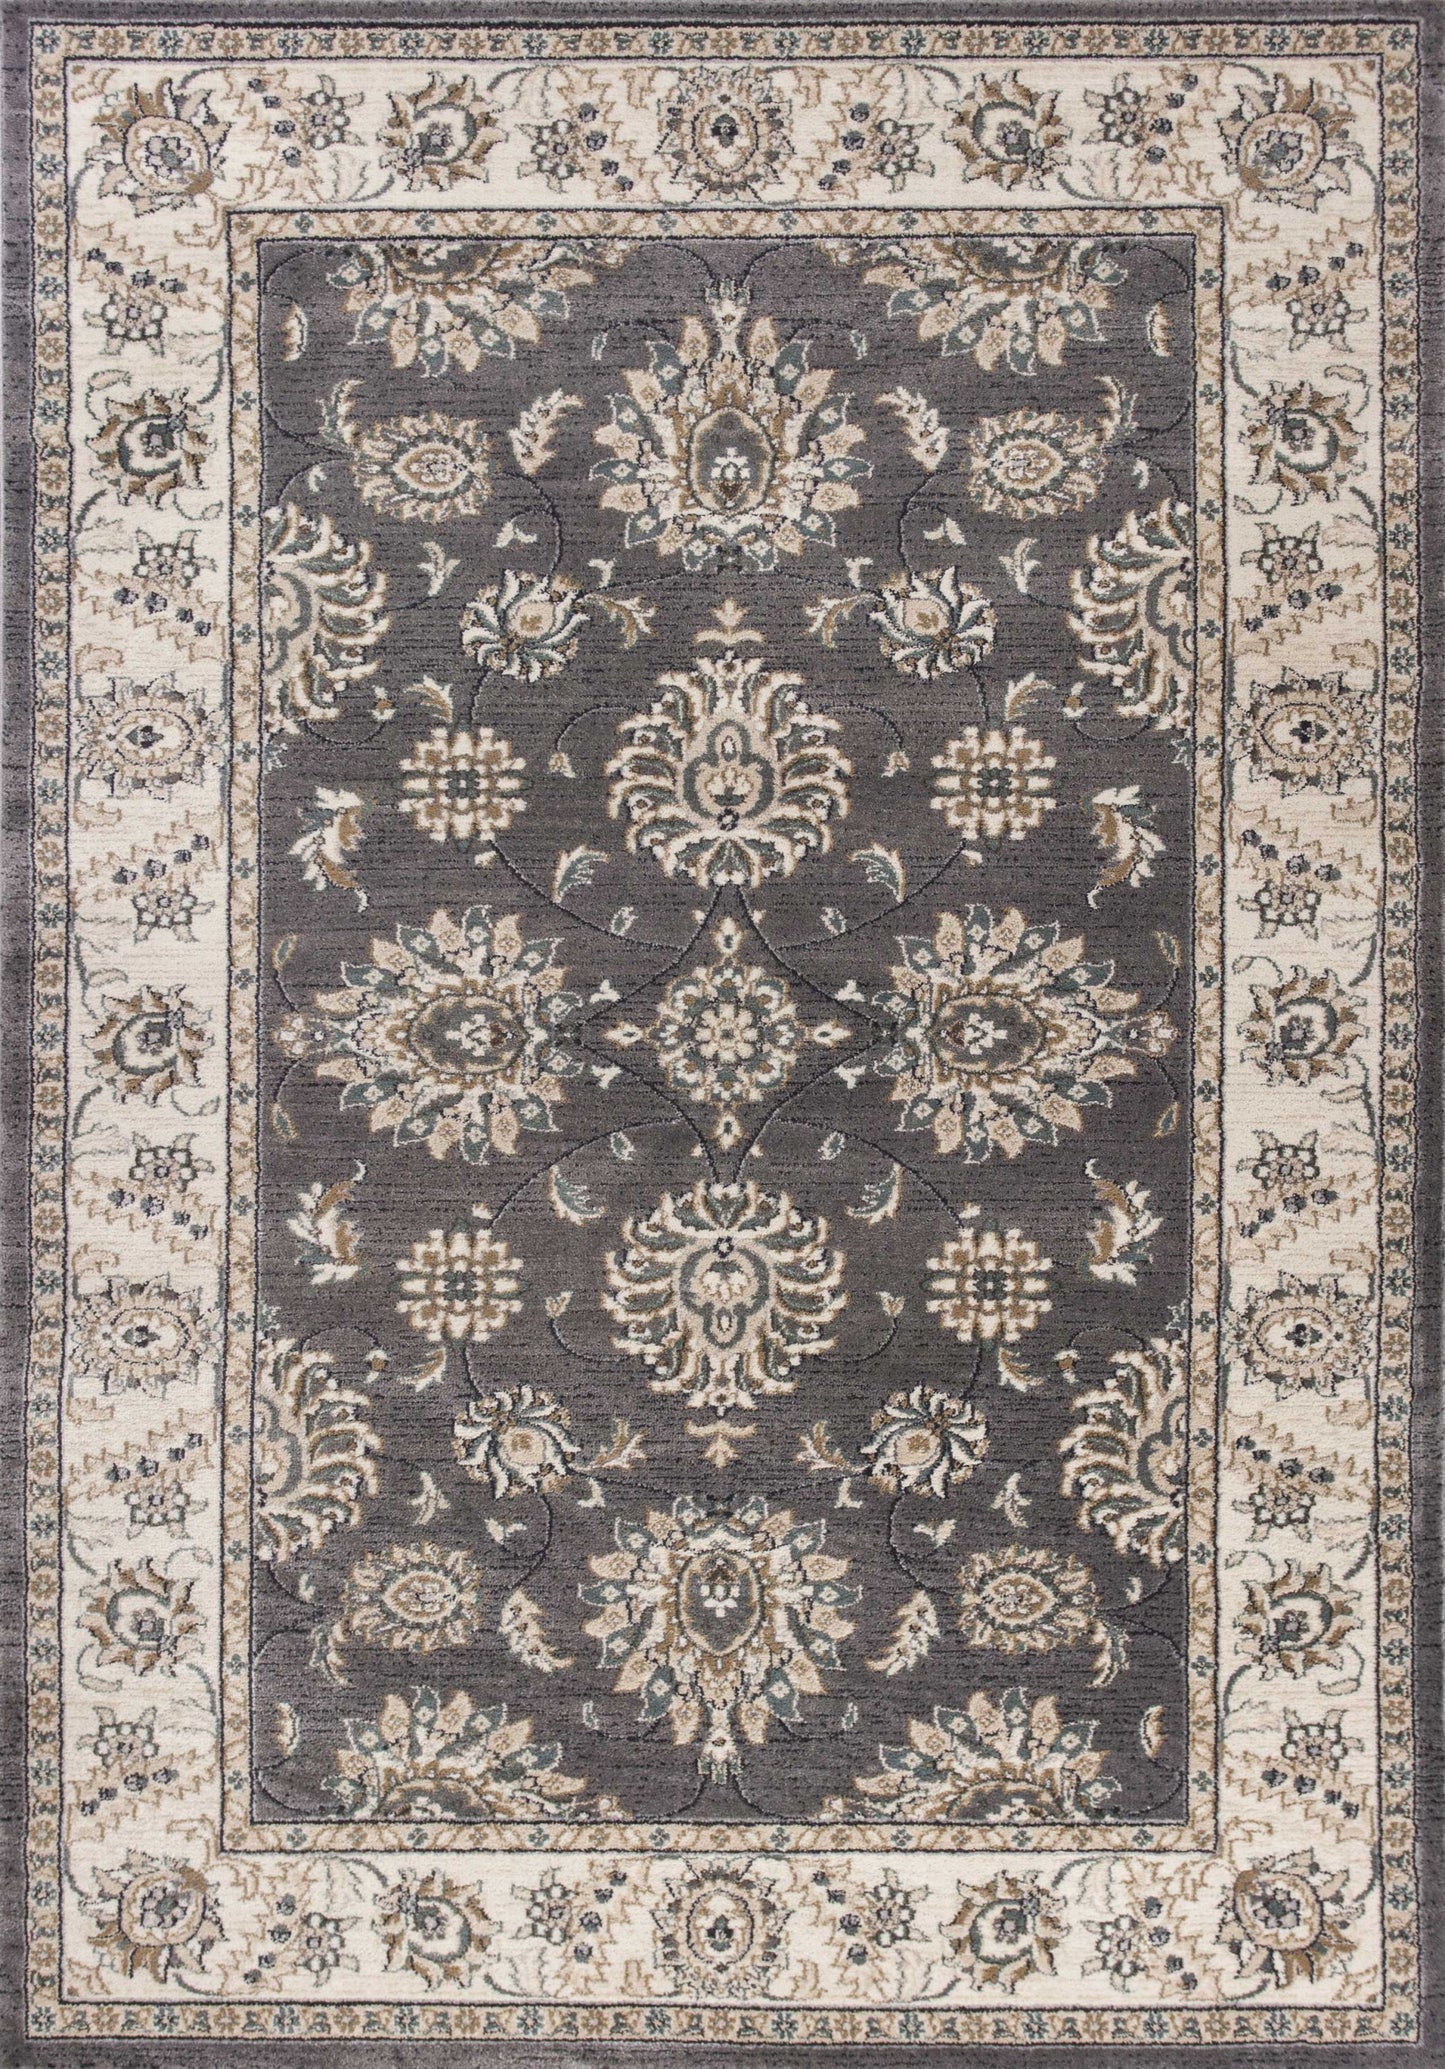 3' X 5' Gray and Ivory Floral Area Rug